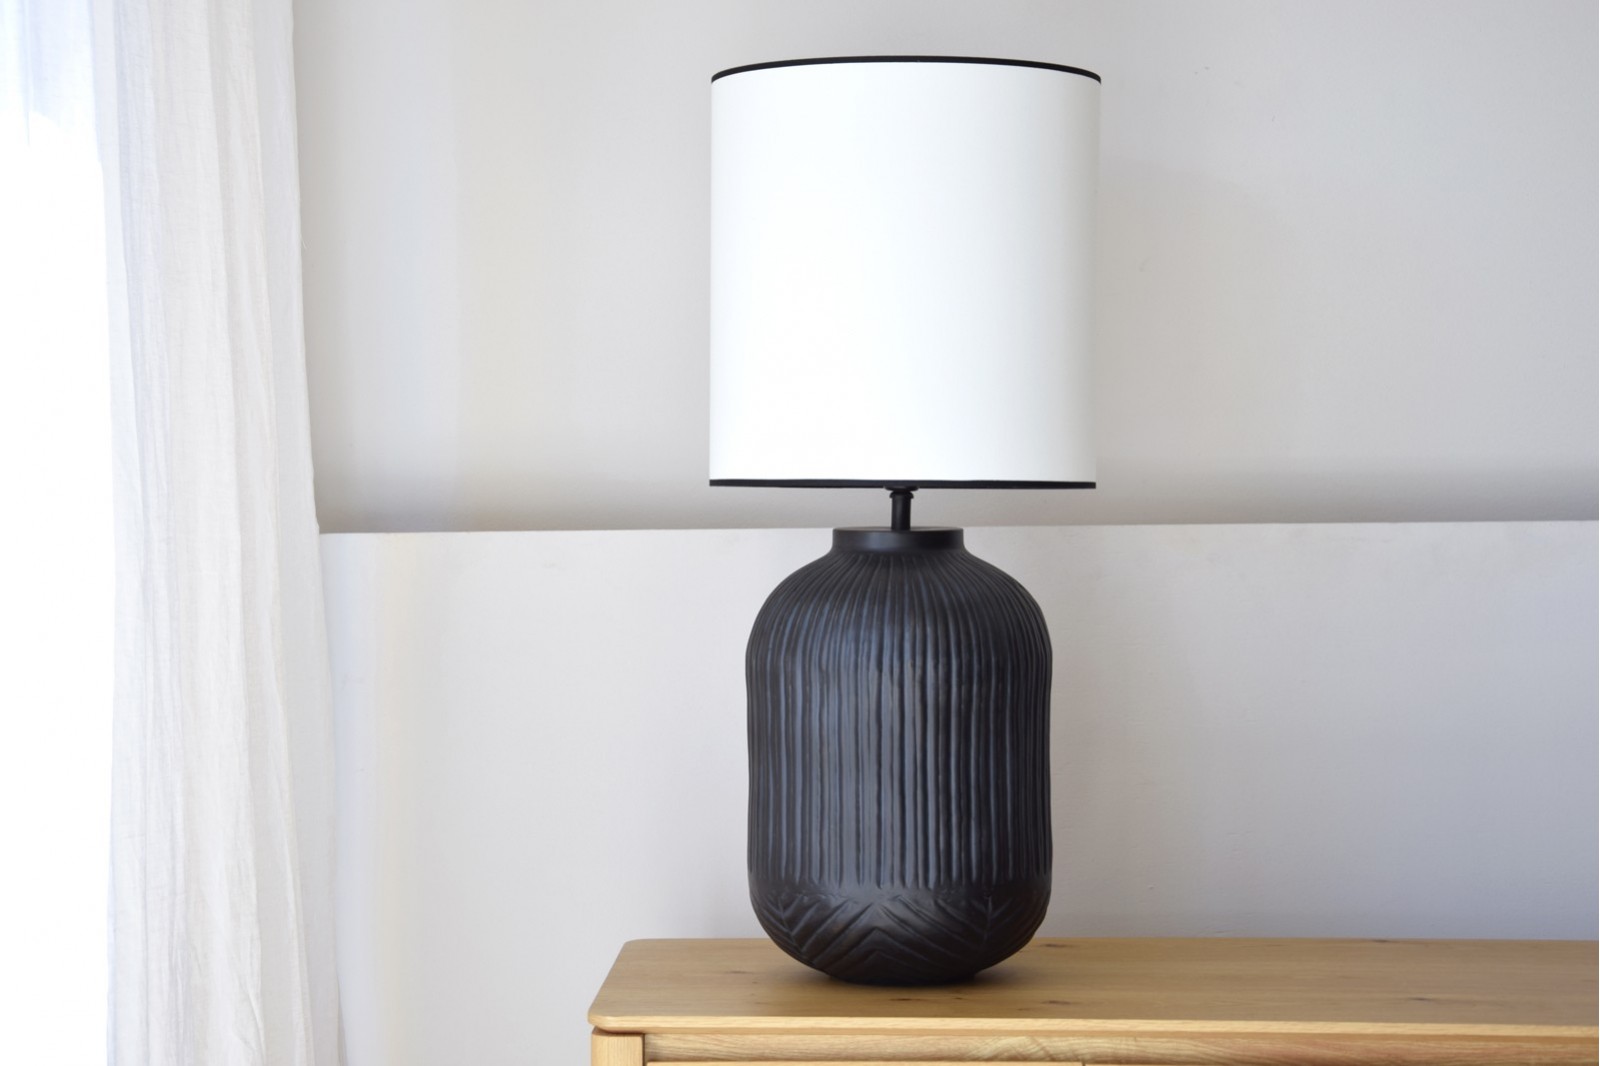 METAL TABLE LAMP N6 WITH SHADE